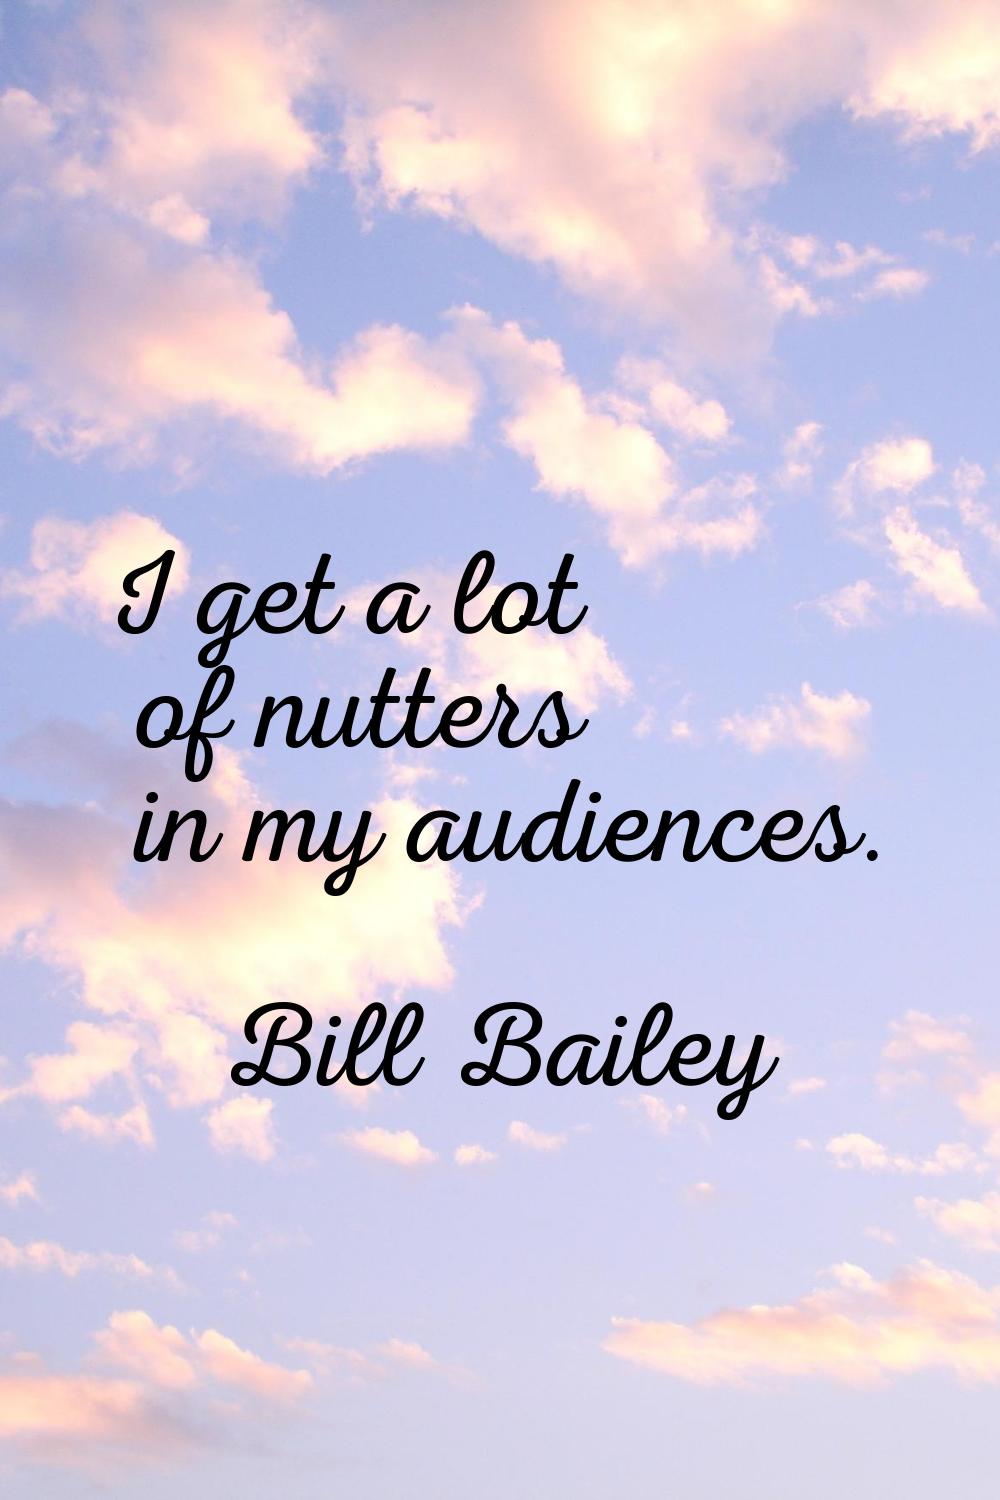 I get a lot of nutters in my audiences.